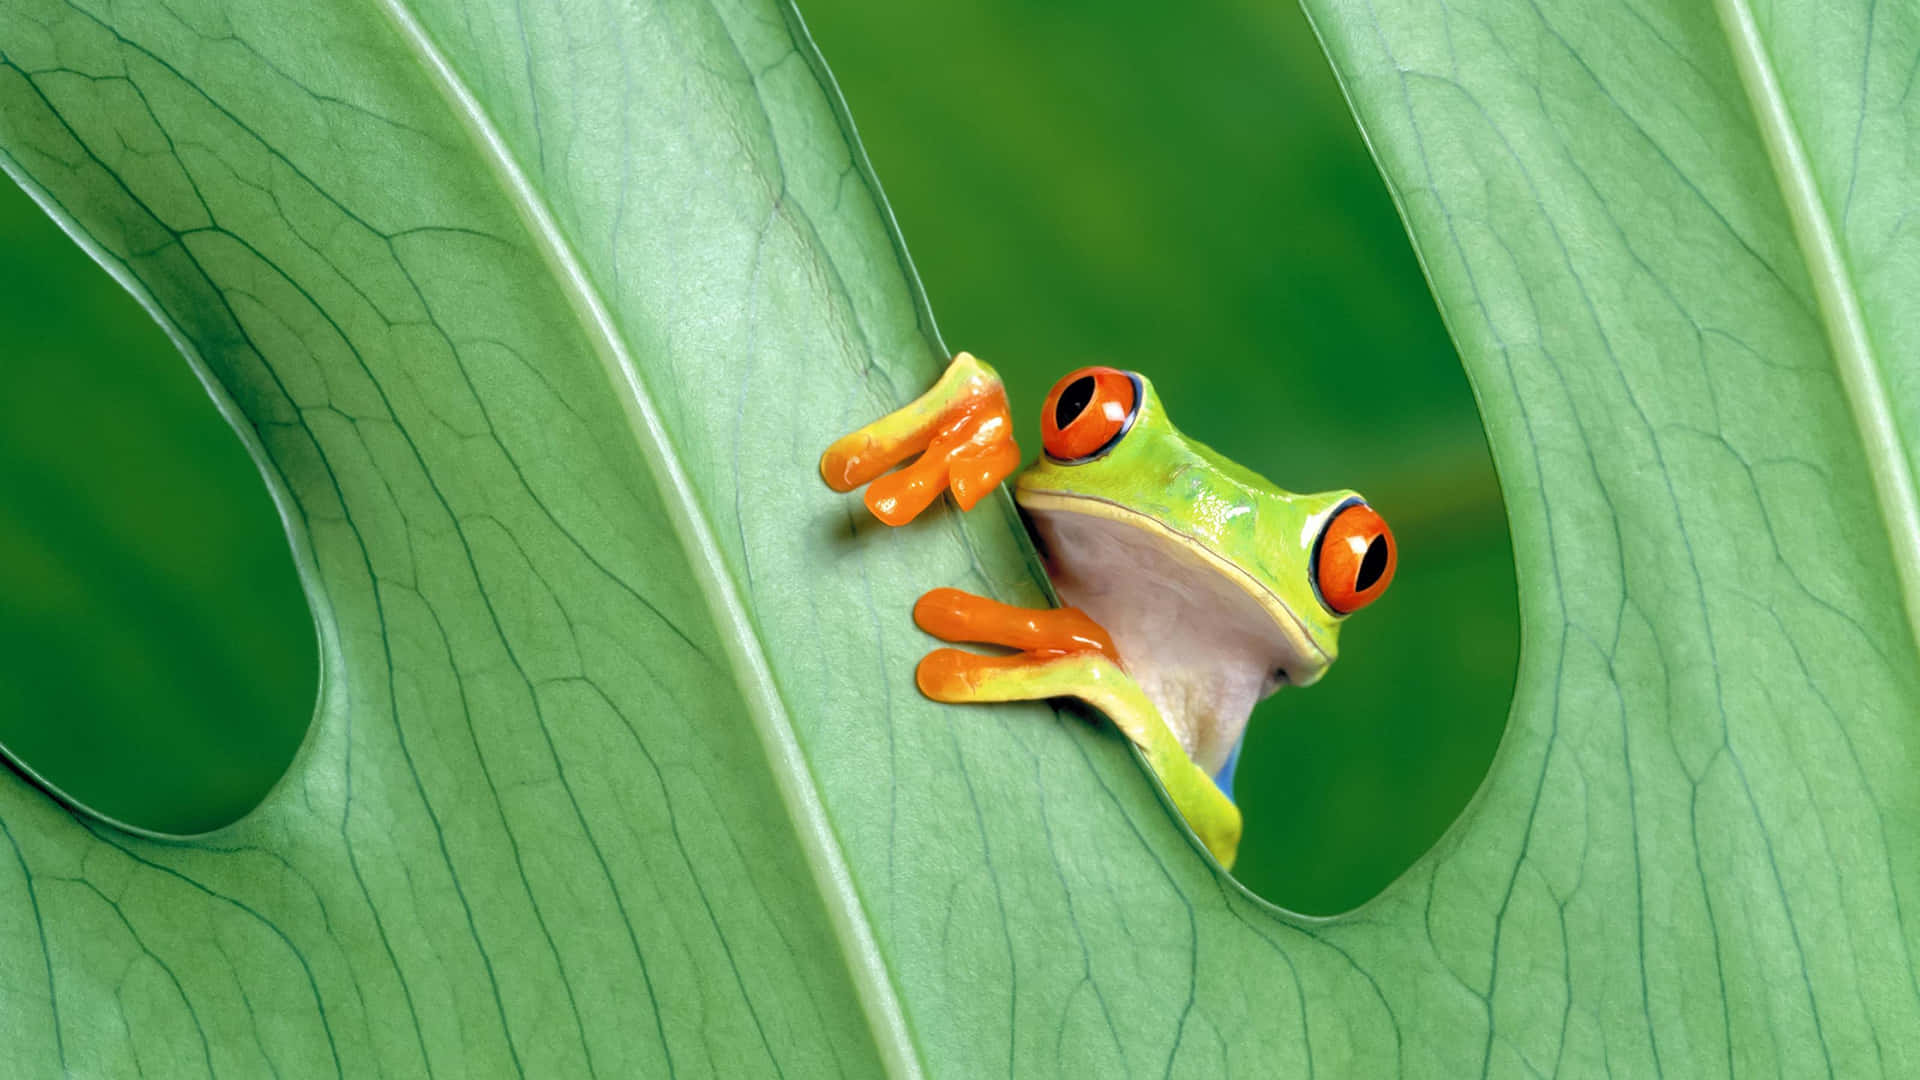 Feel the Joy of Nature with this Cute Frog